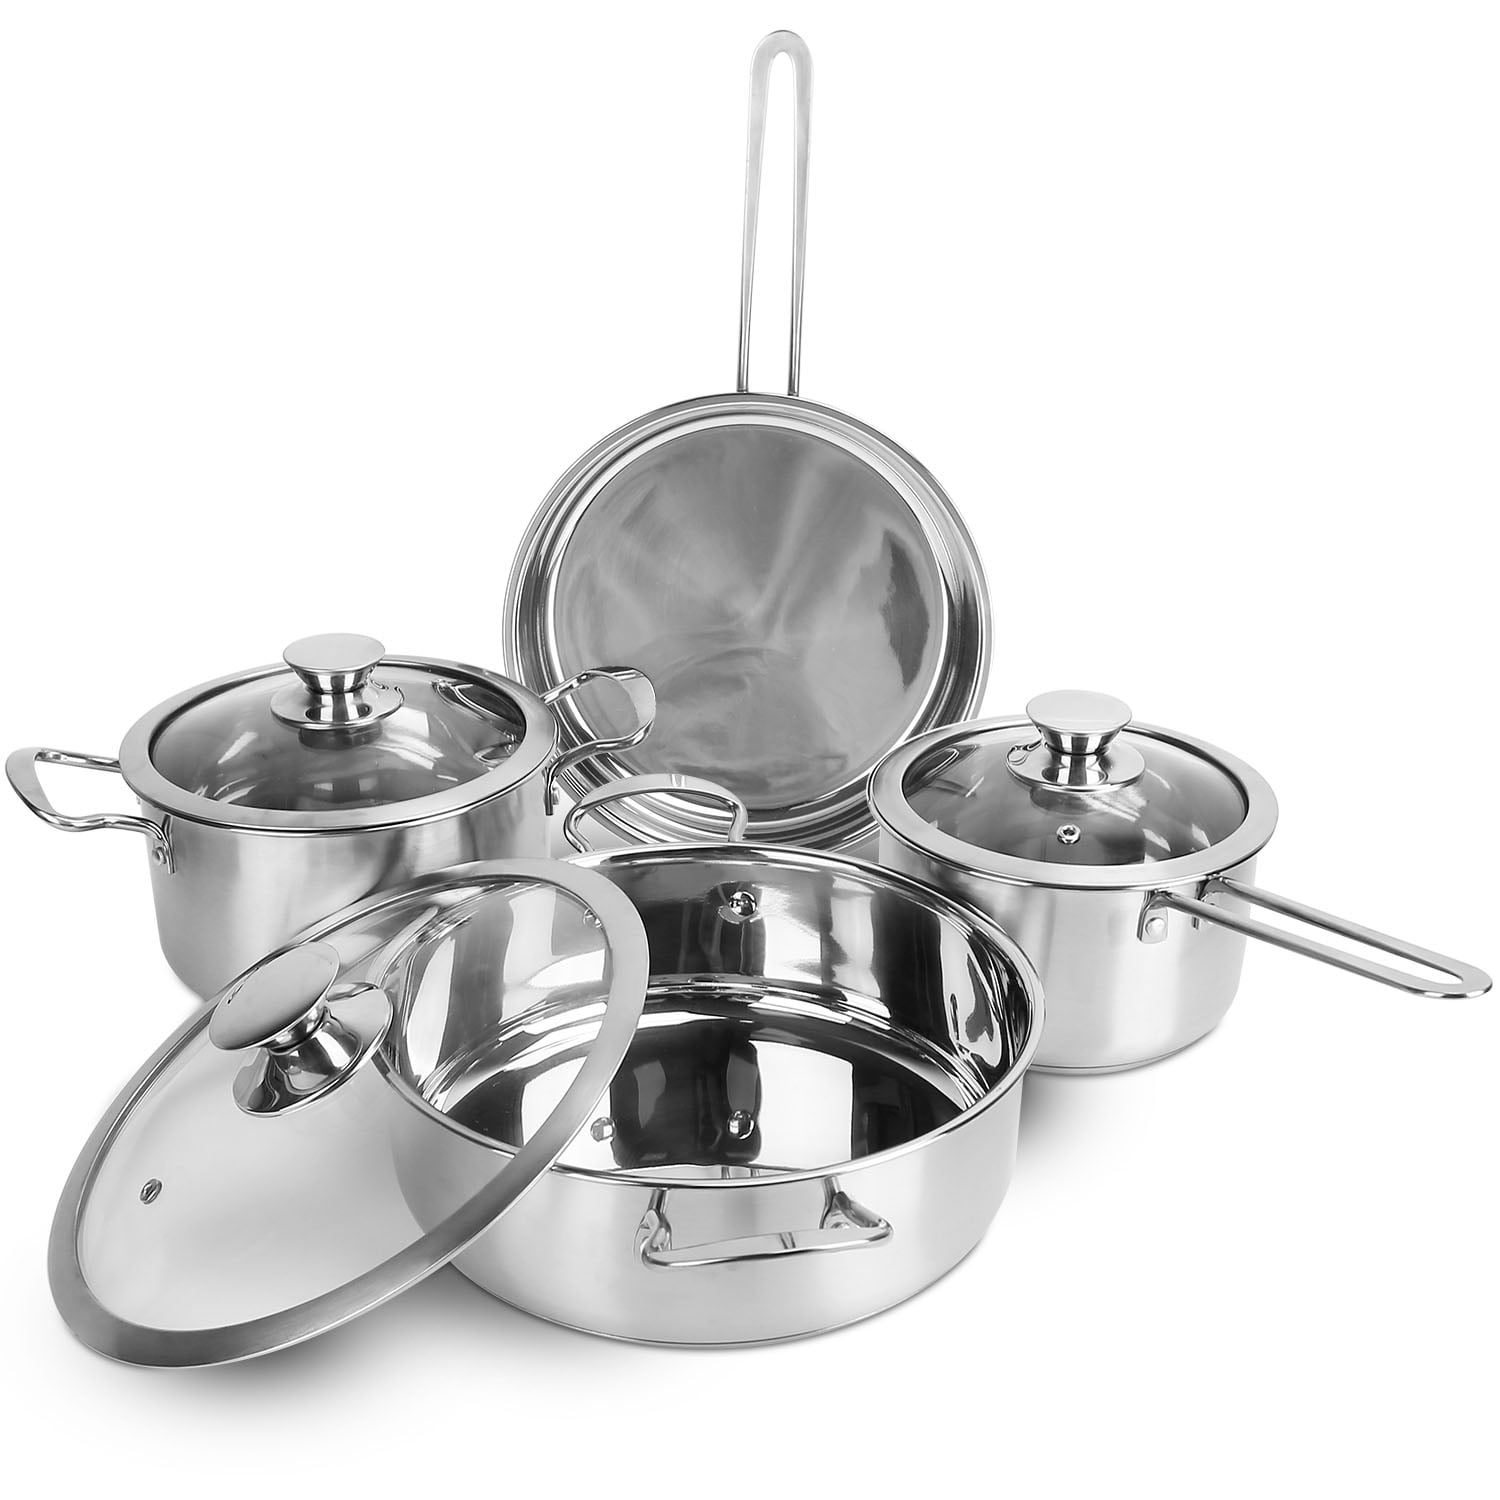 Pots and Pans Sets for sale in Pittsburgh, Pennsylvania